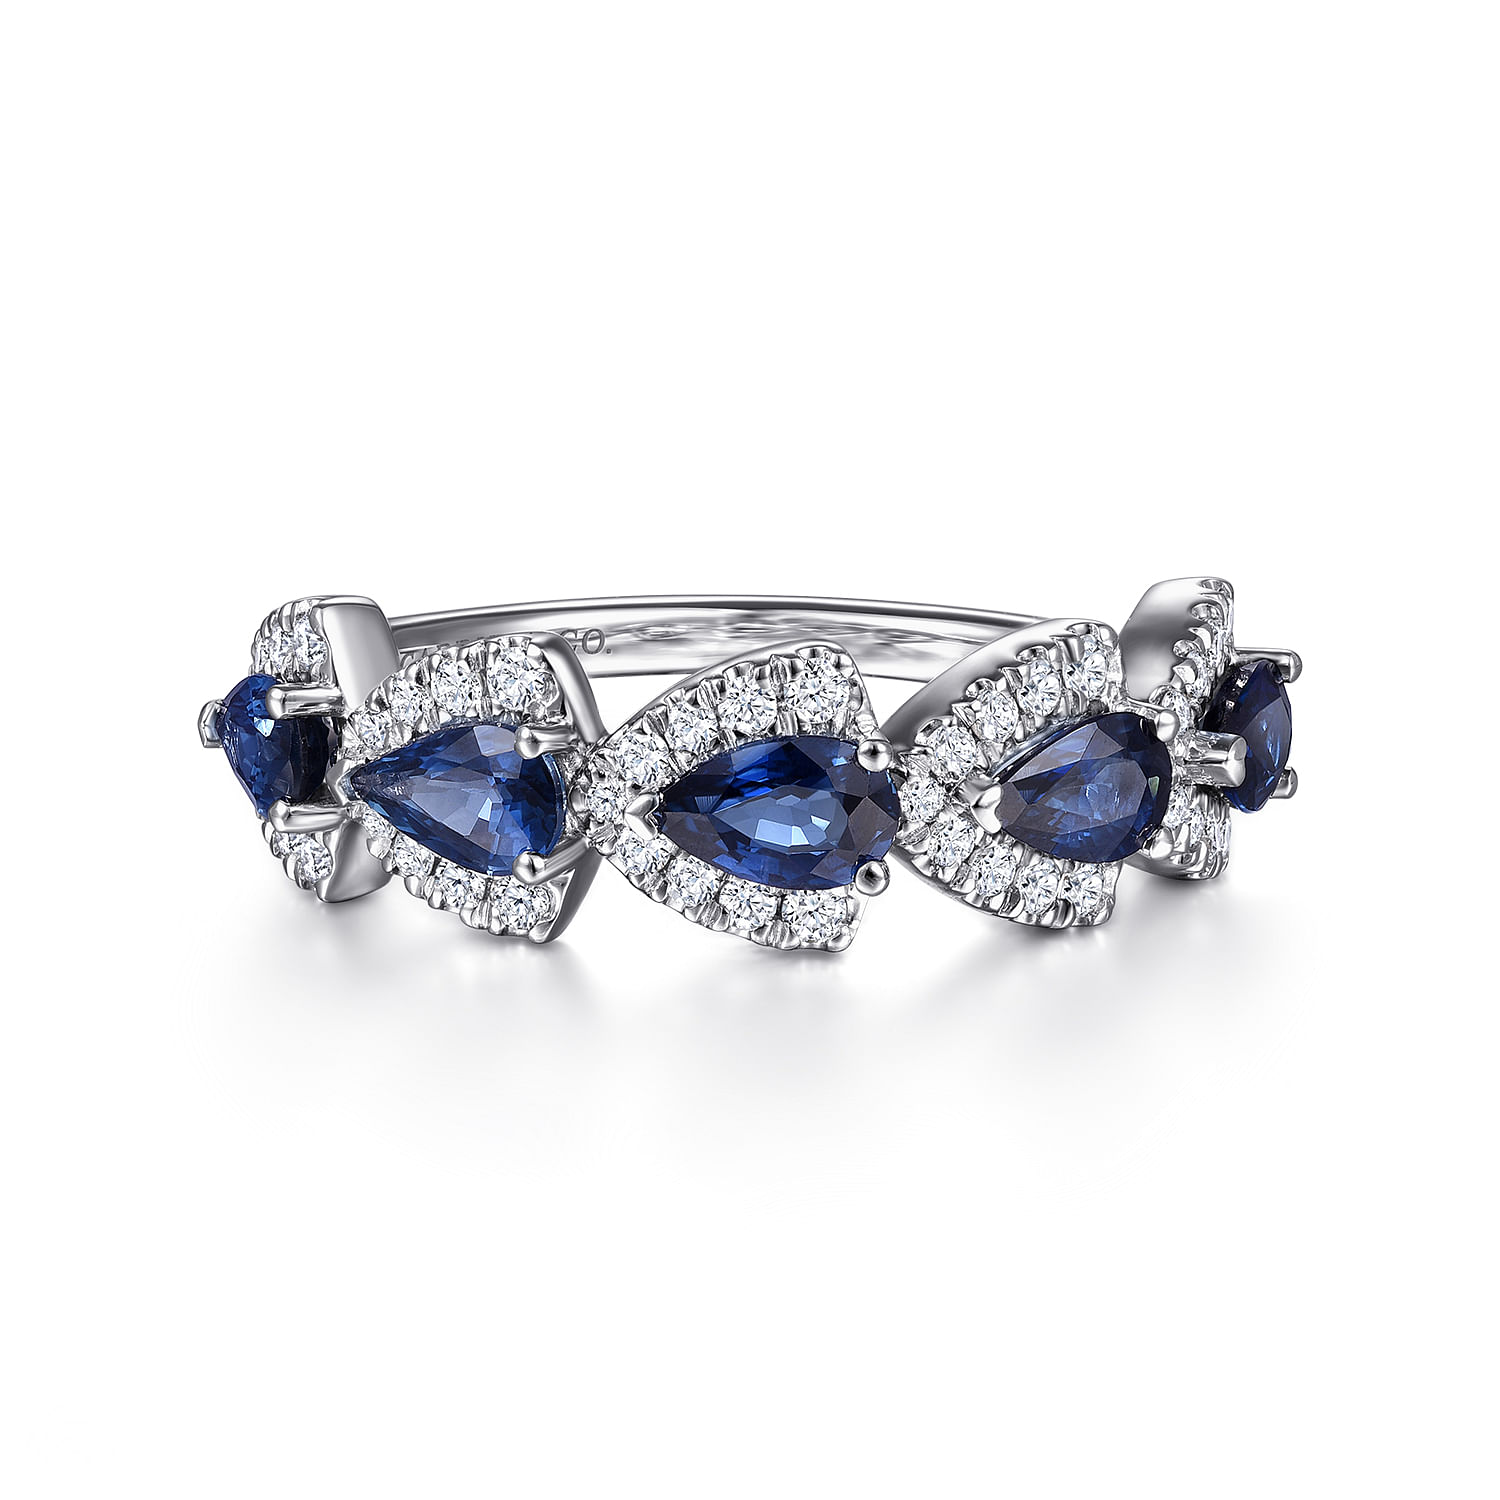 14K White Gold Diamond and Pear Shape Sapphire Station Ring